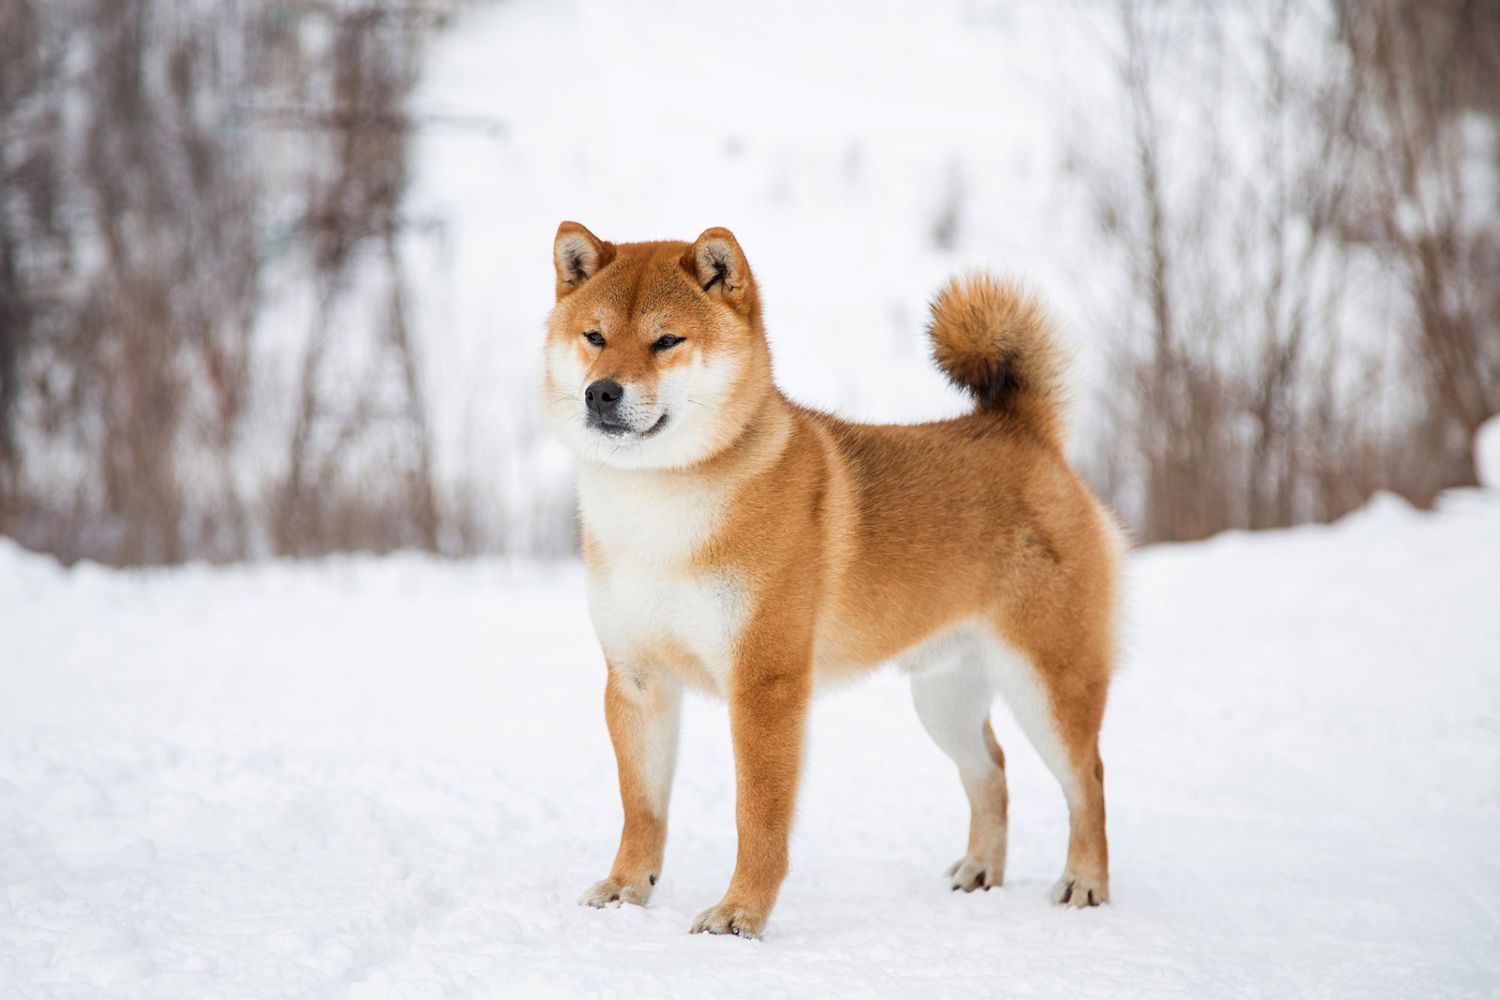 Shiba Inu dog standing in the snow